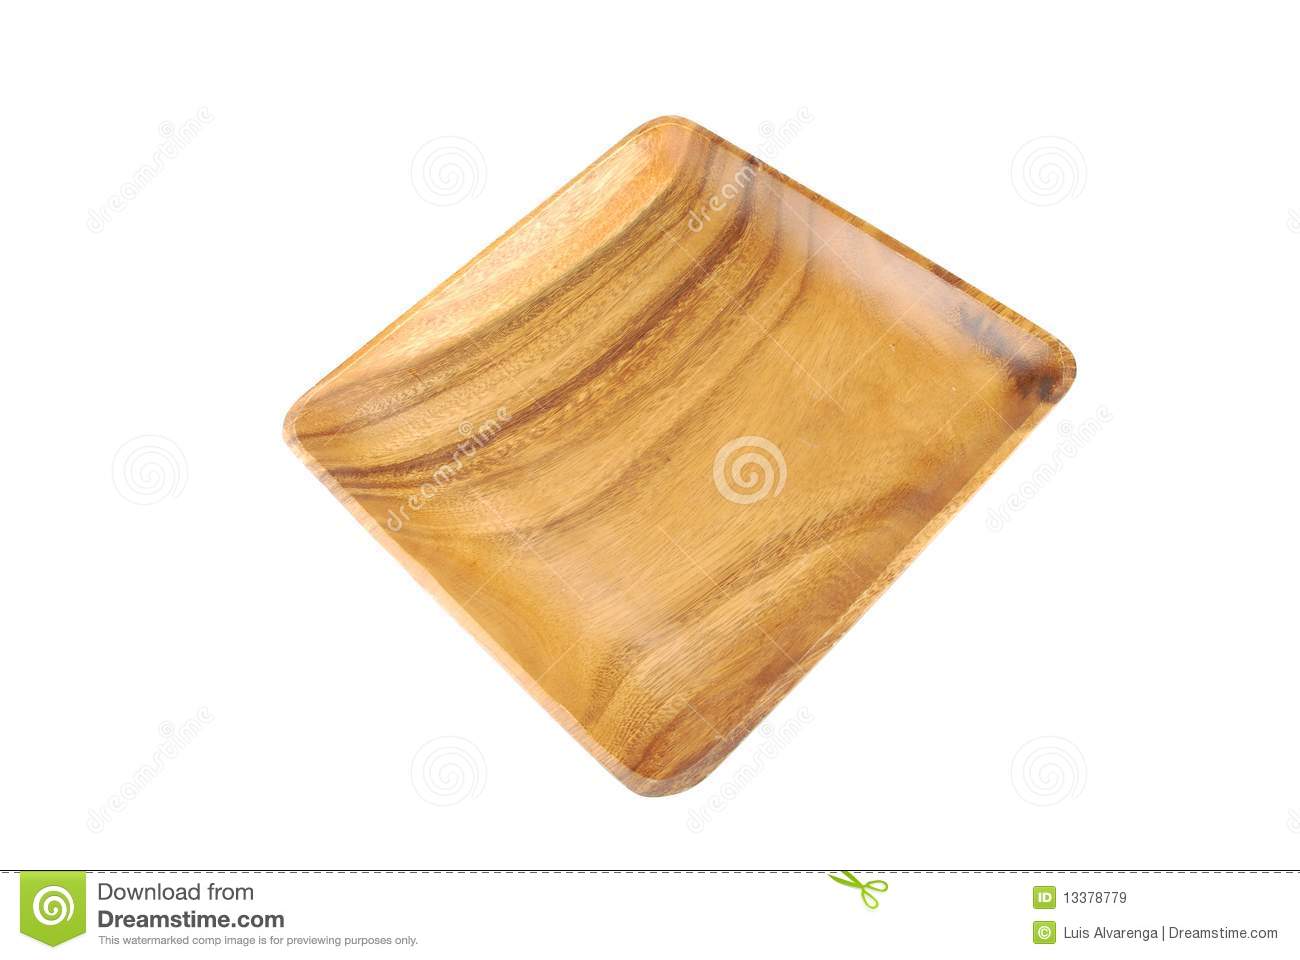 Squared Wooden Tray House Object Isolated On White Background 